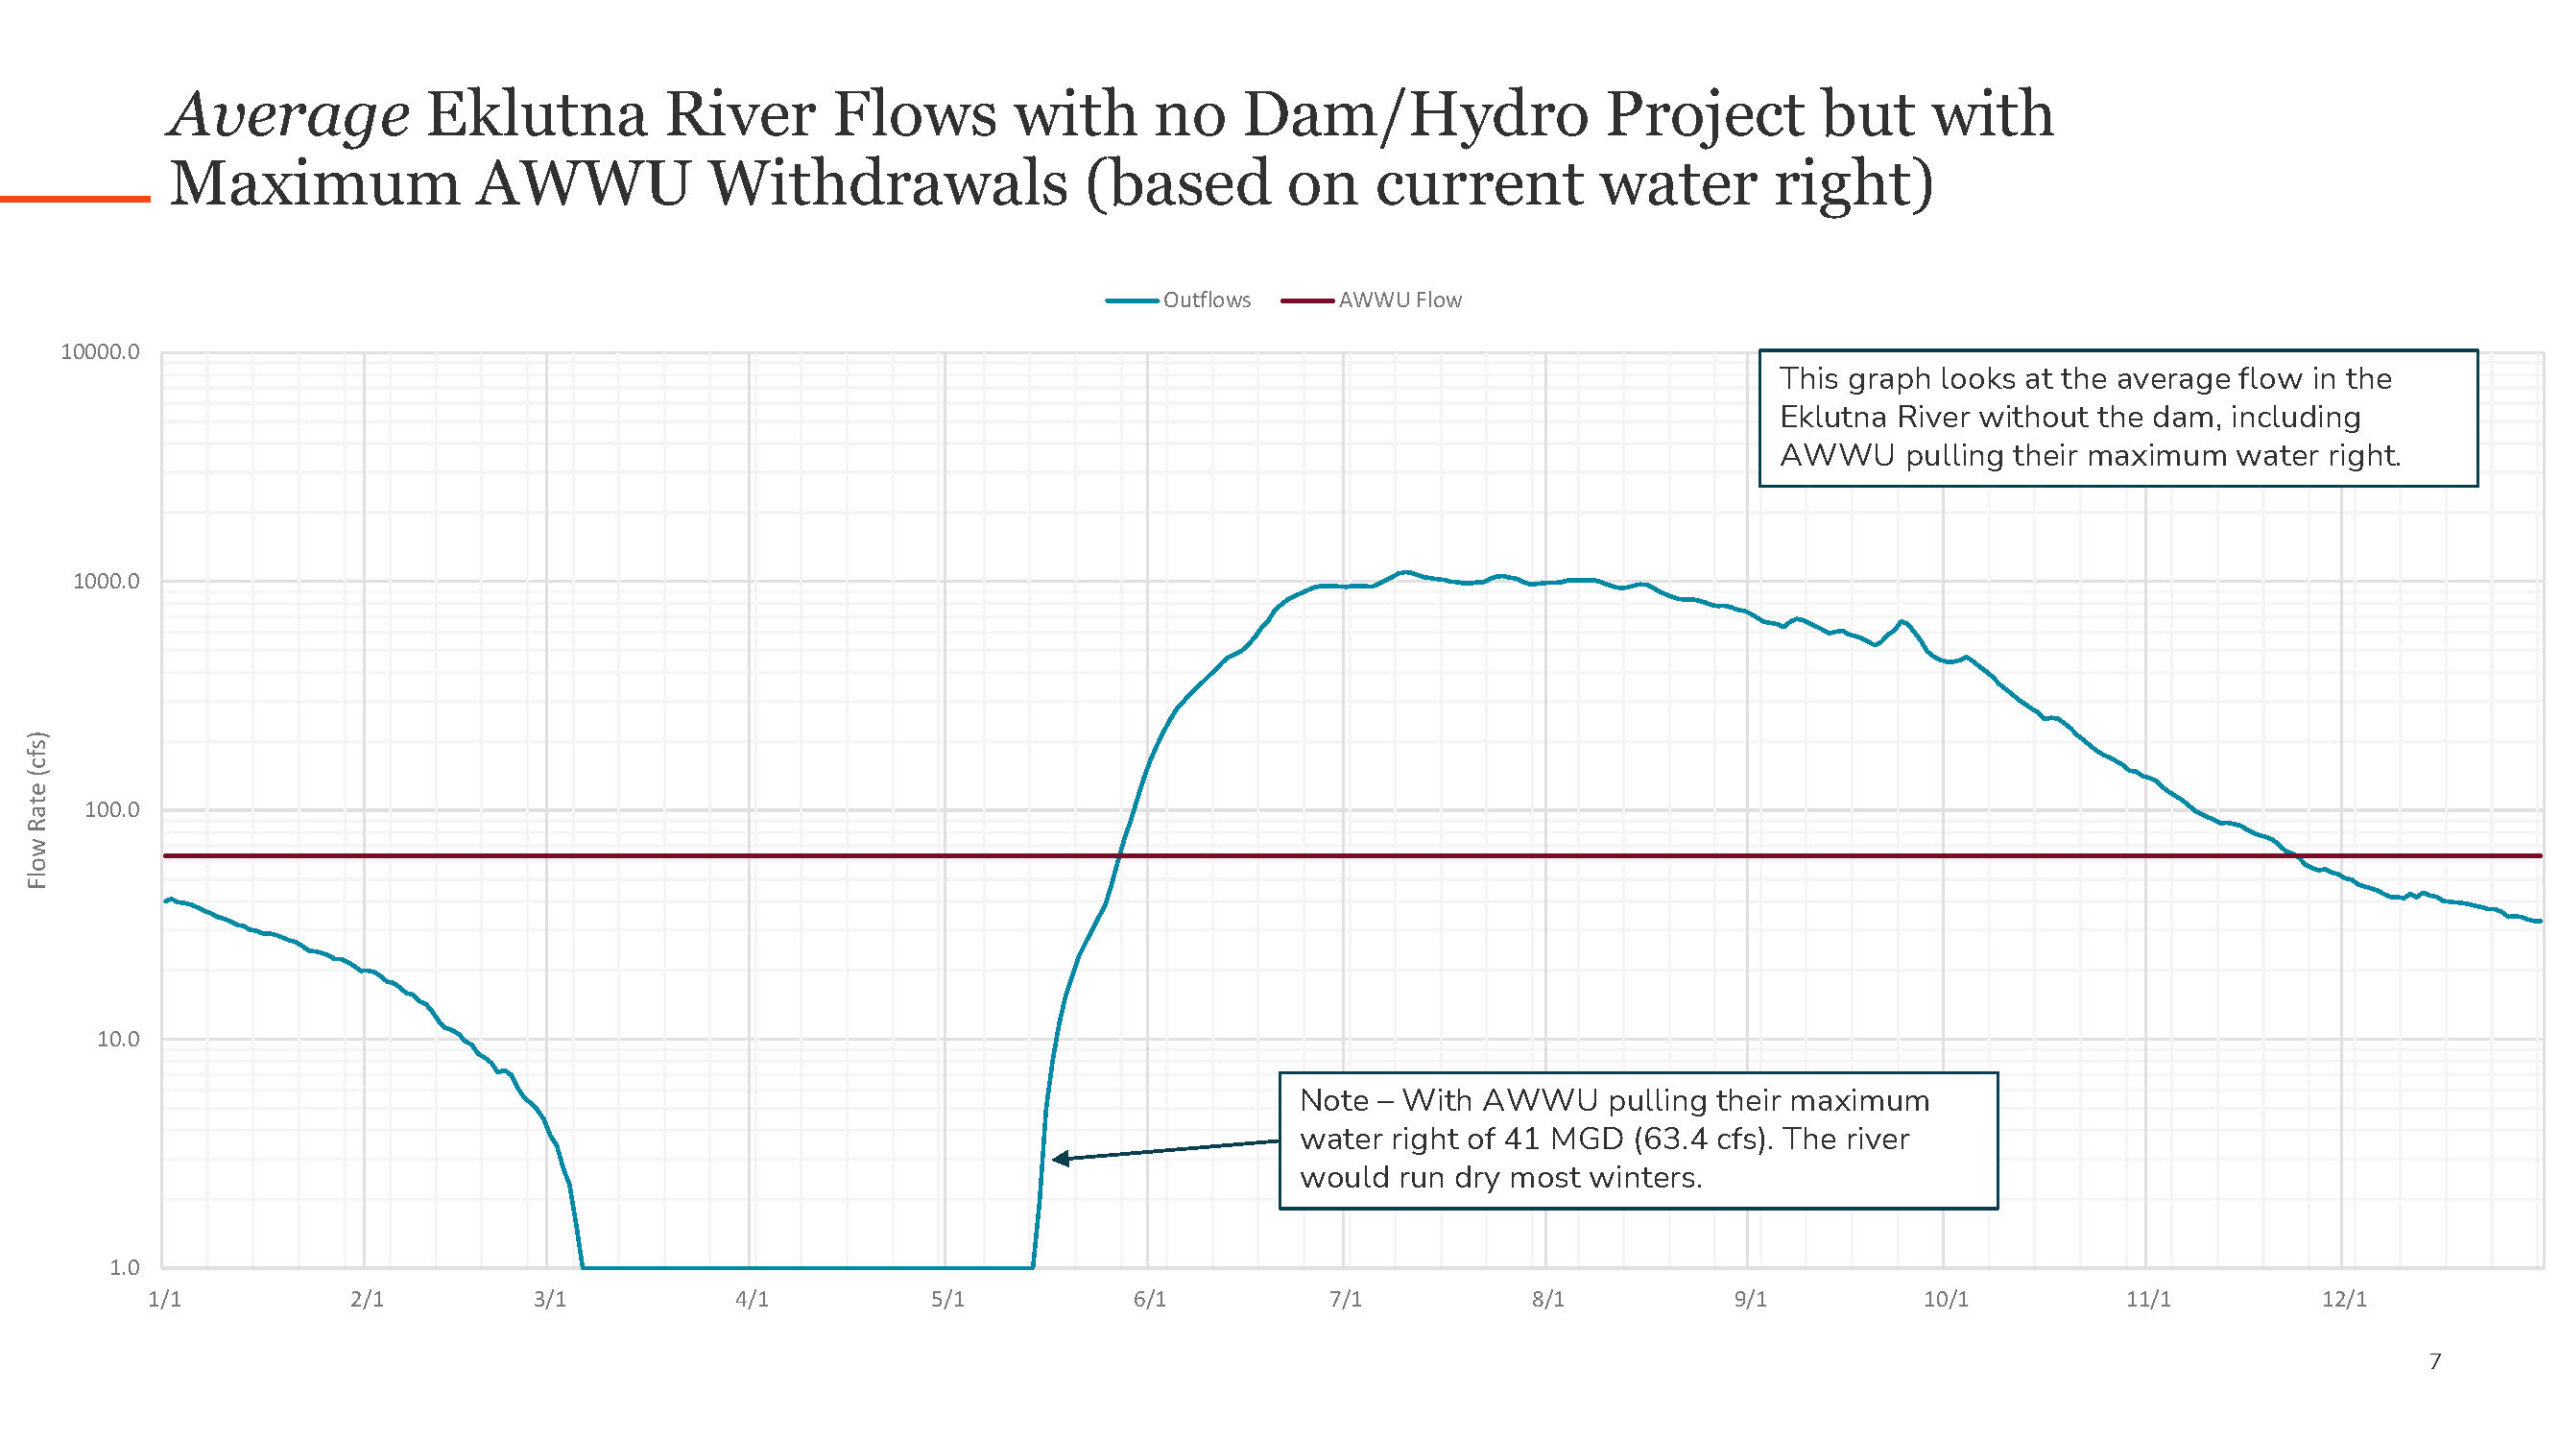 a graph estimating average Eklutna River flow rates if there were no dam and the water utility drew its full water right